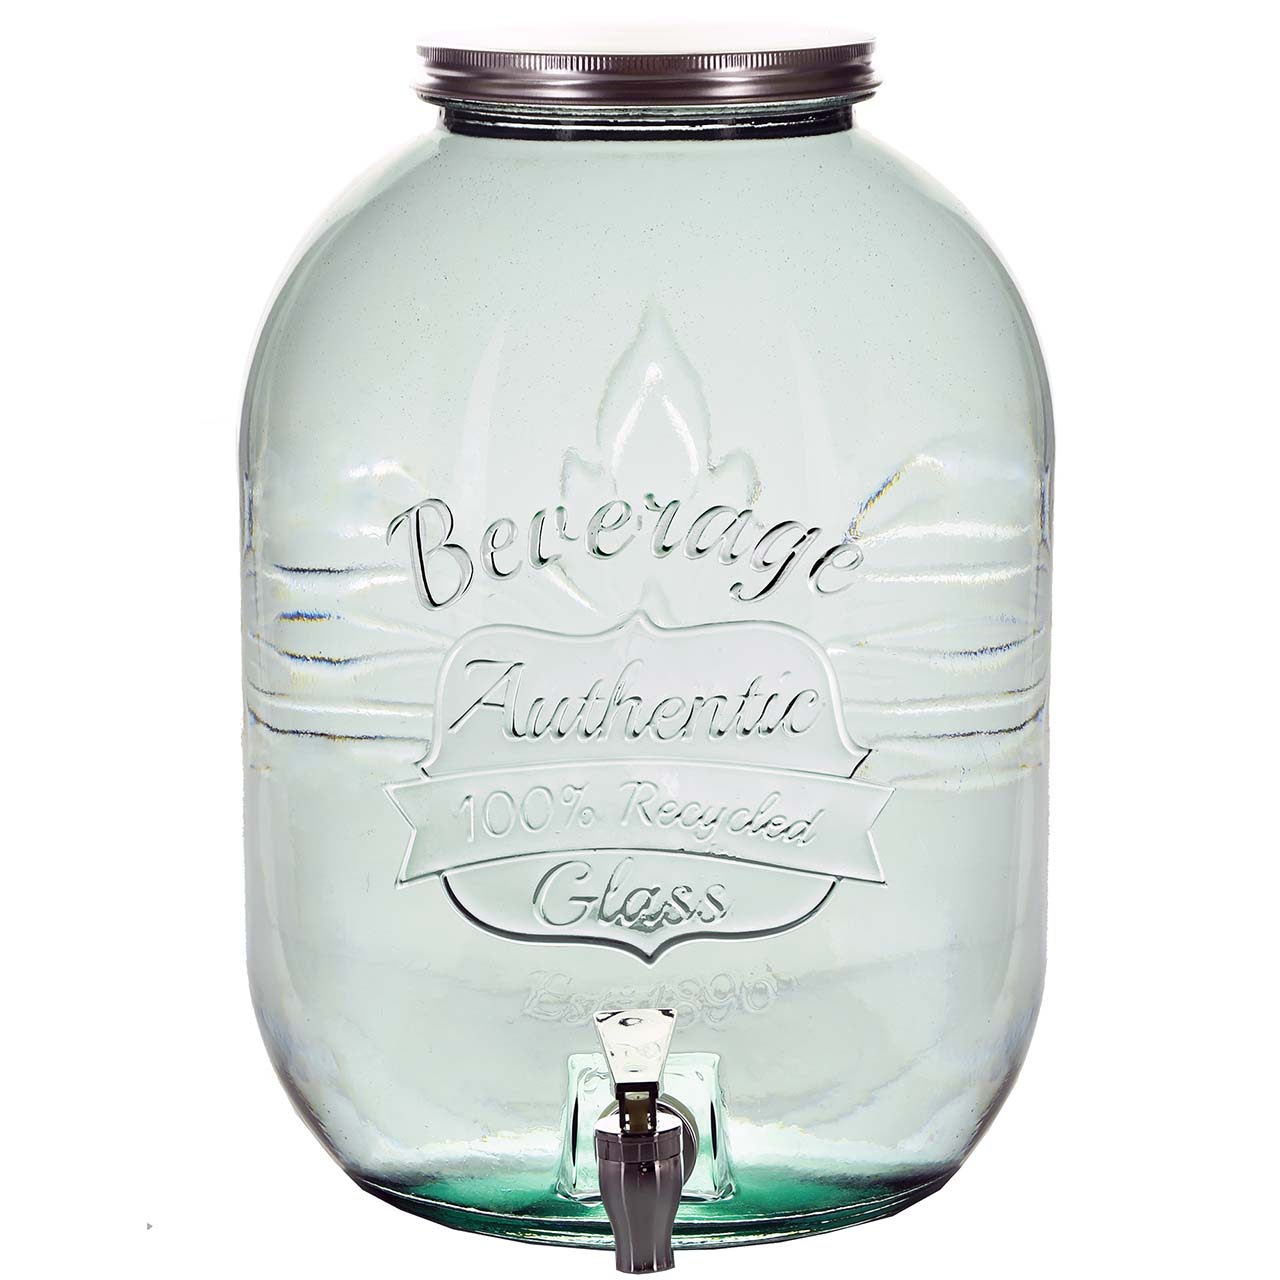 https://www.couronneco.com/media/catalog/product/G/5/G5294-SQ-Large-Authentic-Recycled-Glass-Jar-Spigot.jpg?store=couronneco&image-type=image